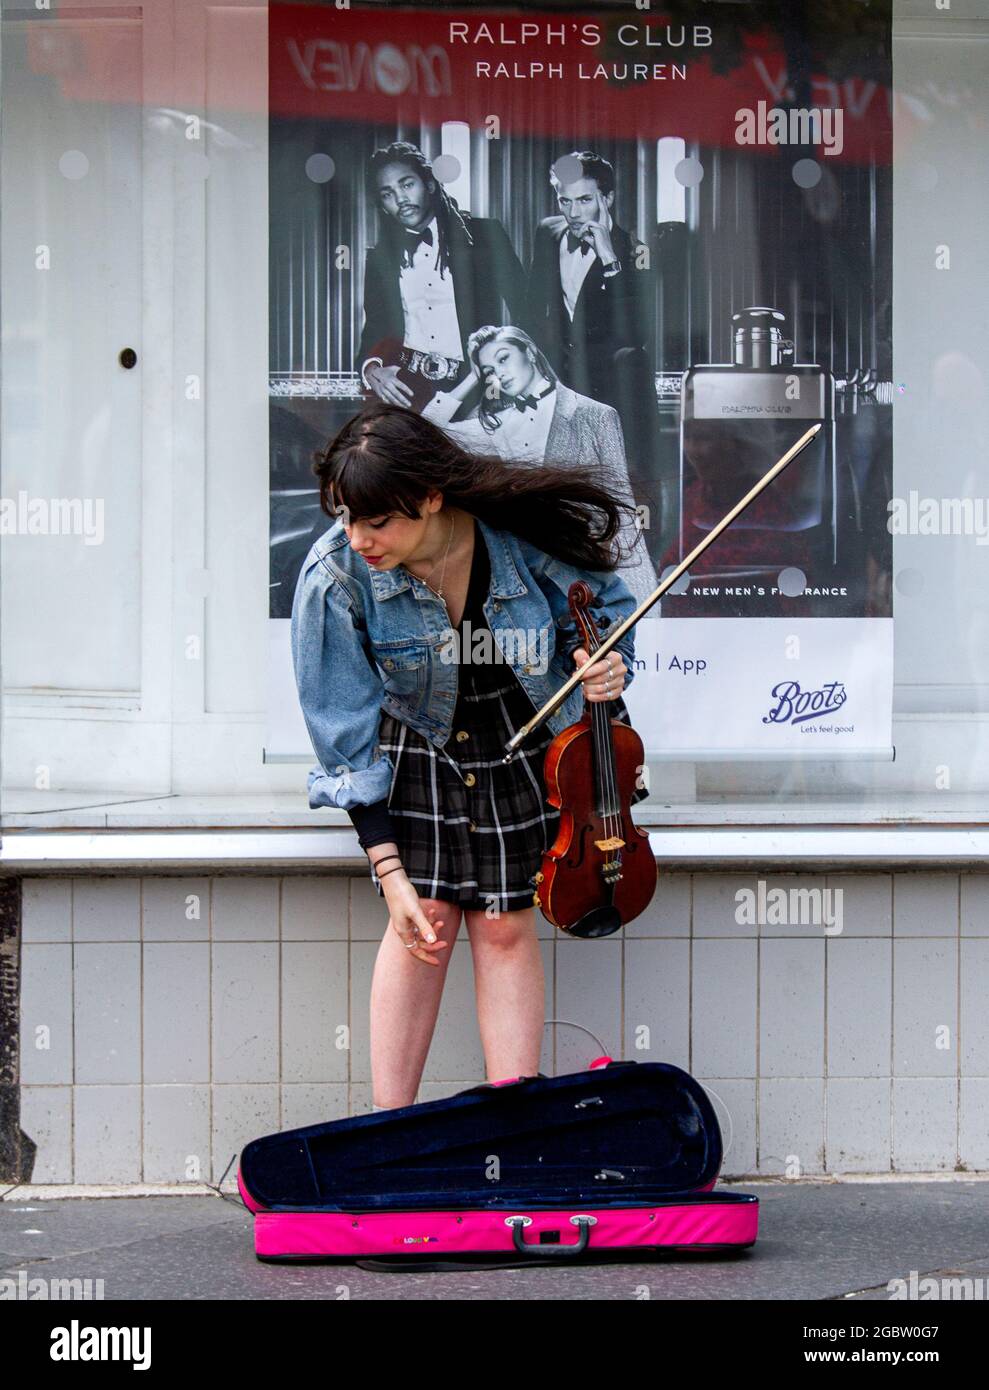 Dundee, Tayside, Scotland, UK. 5th Aug, 2021. UK Weather: A bright and windy day with sunny spells across North East Scotland with temperatures reaching 20°C. A young female violinist playing classical music whilst busking in the wind outside Boots the Chemist in Dundee city centre. Credit: Dundee Photographics/Alamy Live News Stock Photo